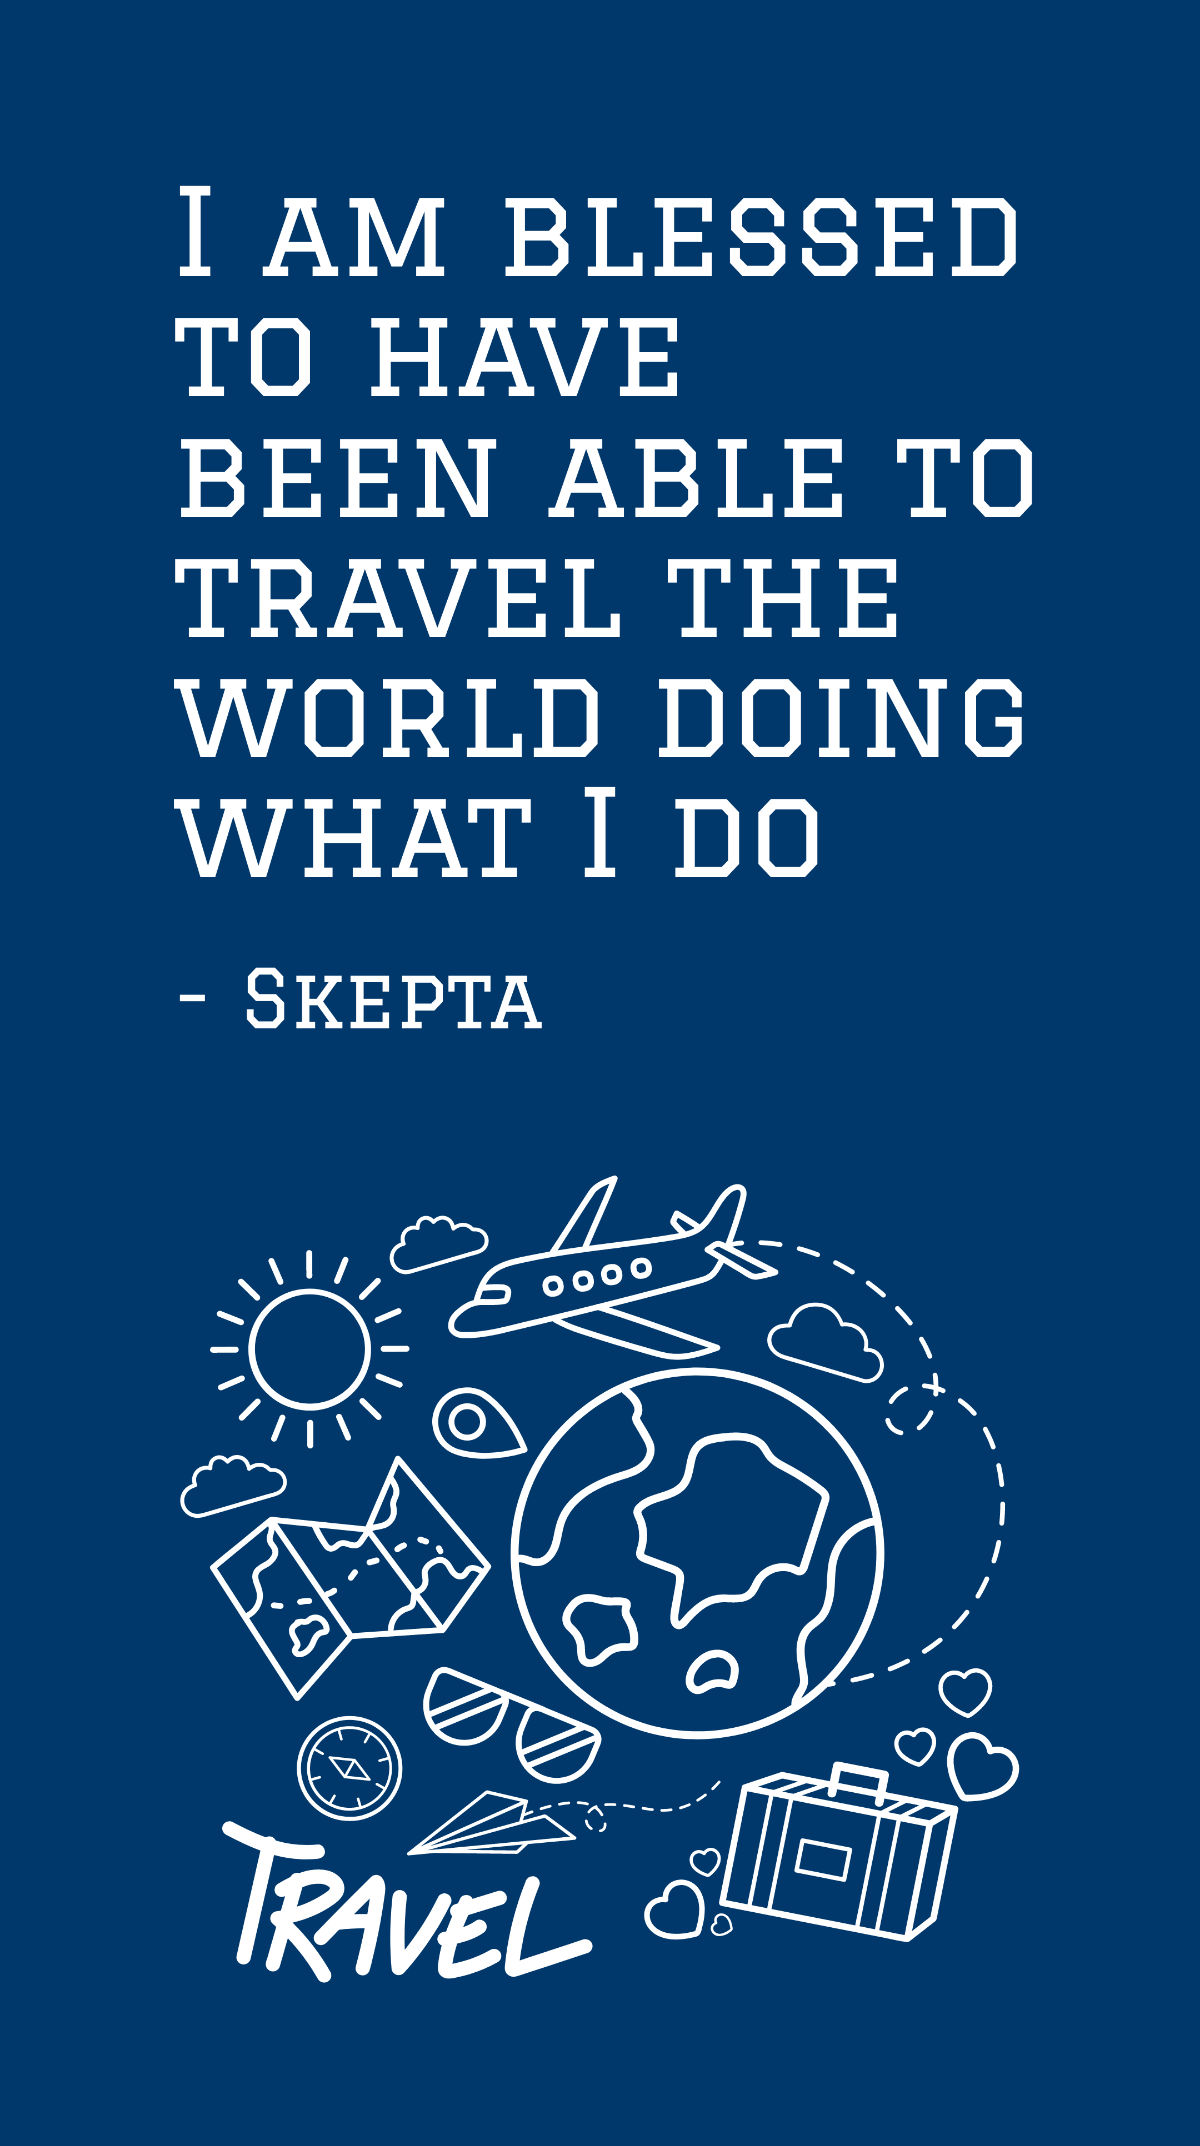 Skepta - I am blessed to have been able to travel the world doing what I do Template